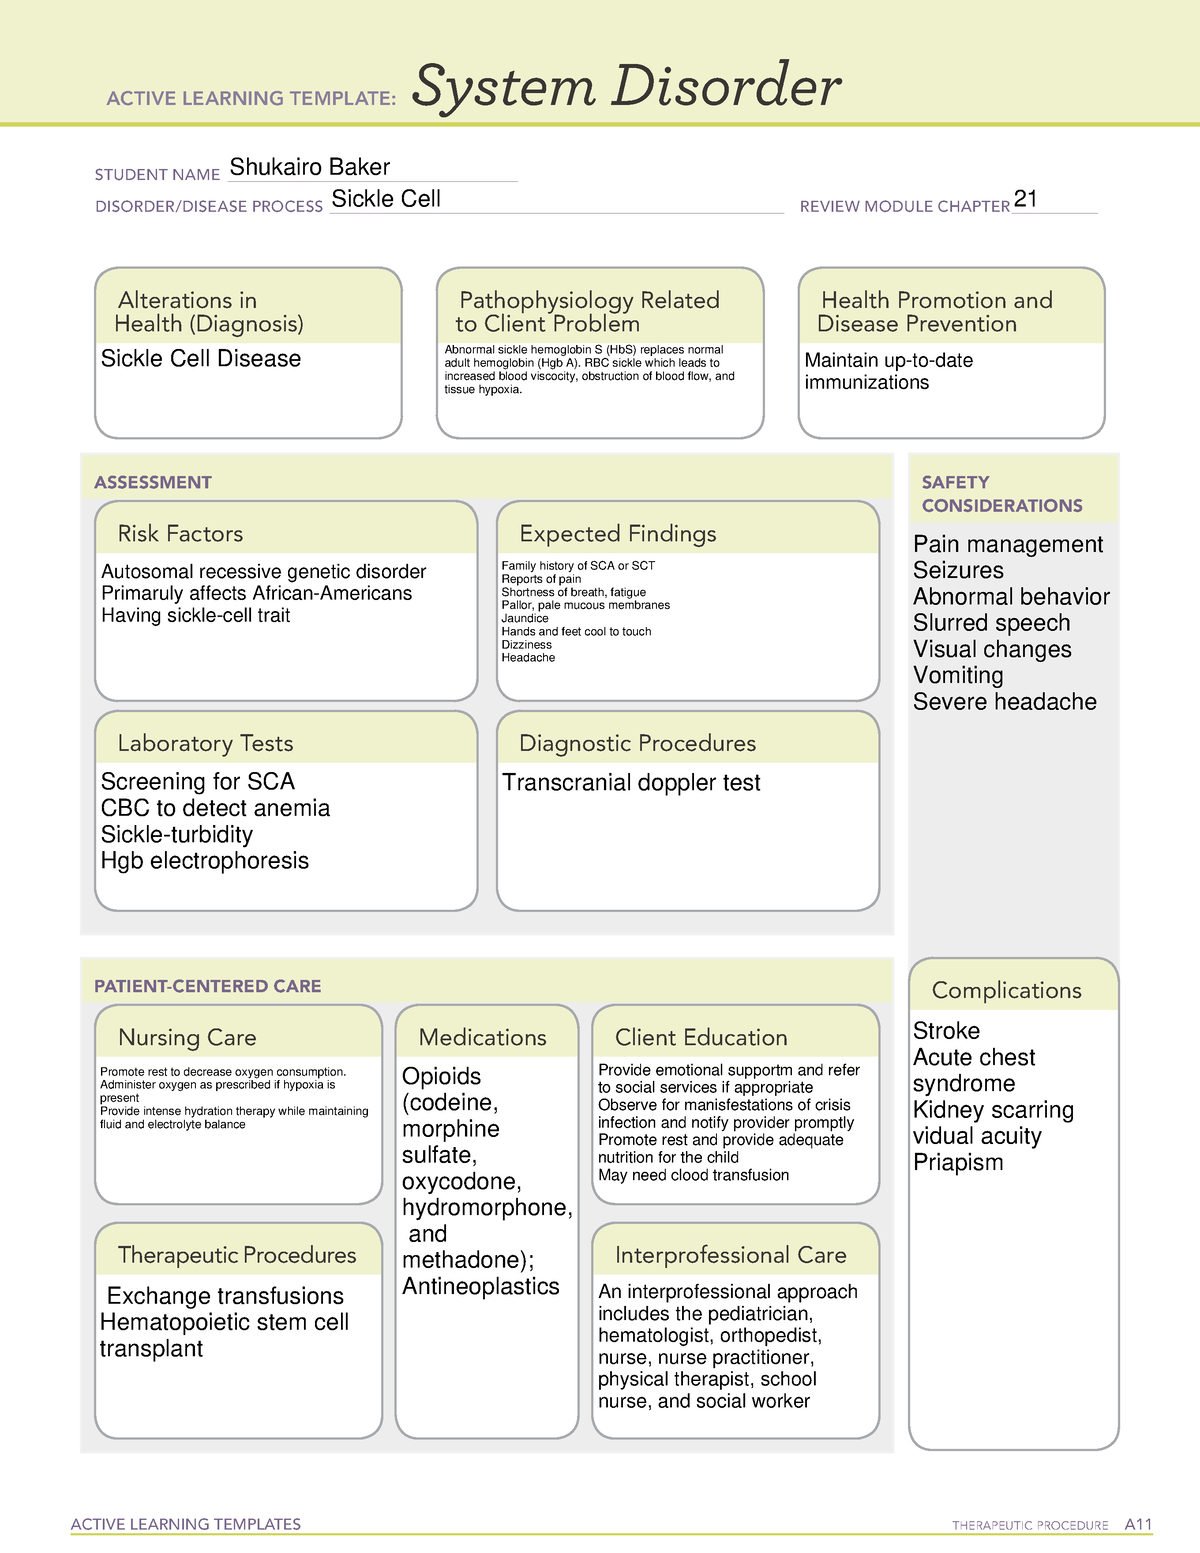 Sickle Cell Anemia System Disorder Template